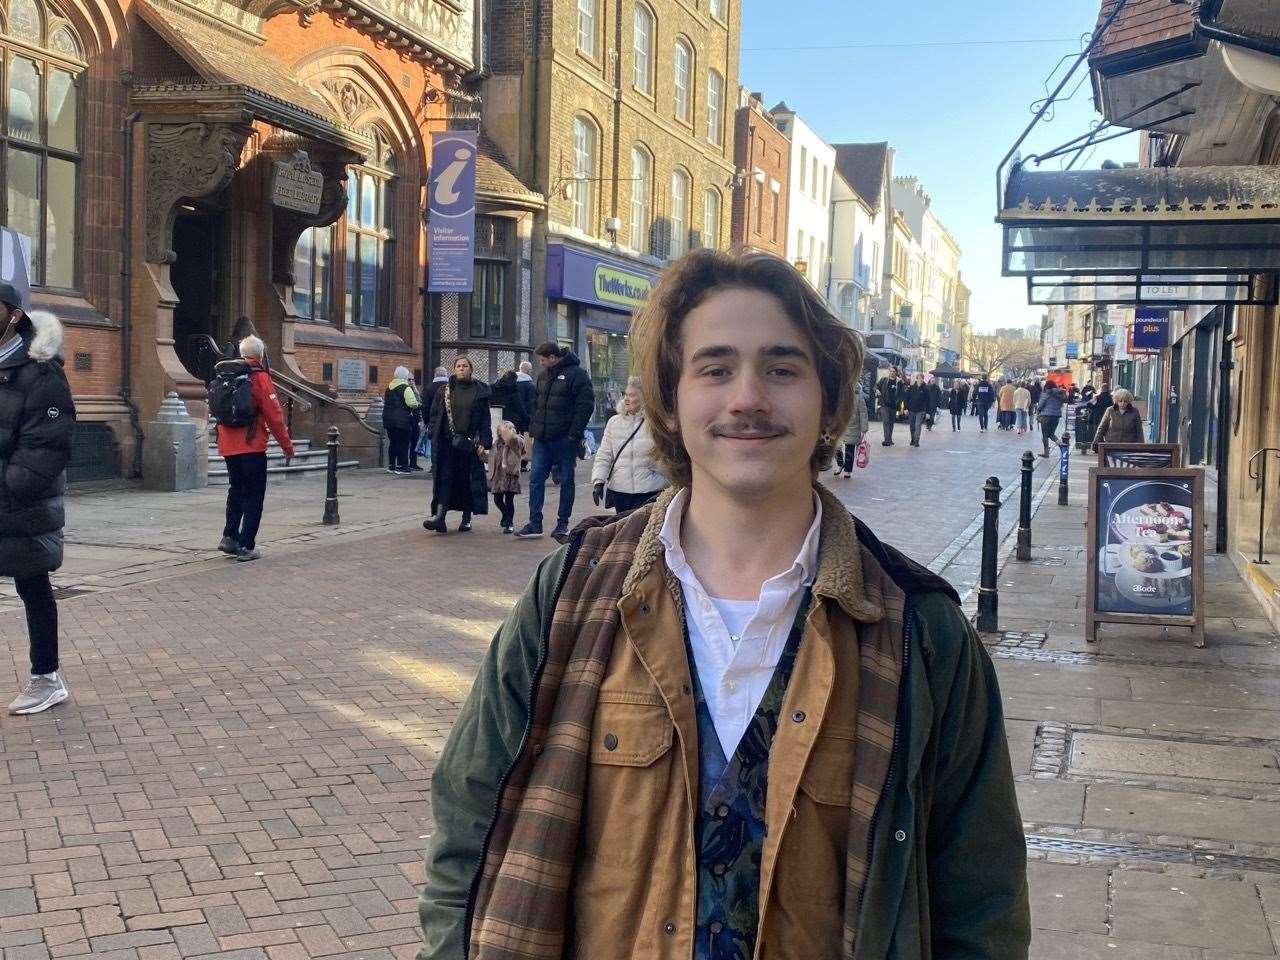 Marcus, 18, agrees that some shops in Canterbury high street look garish